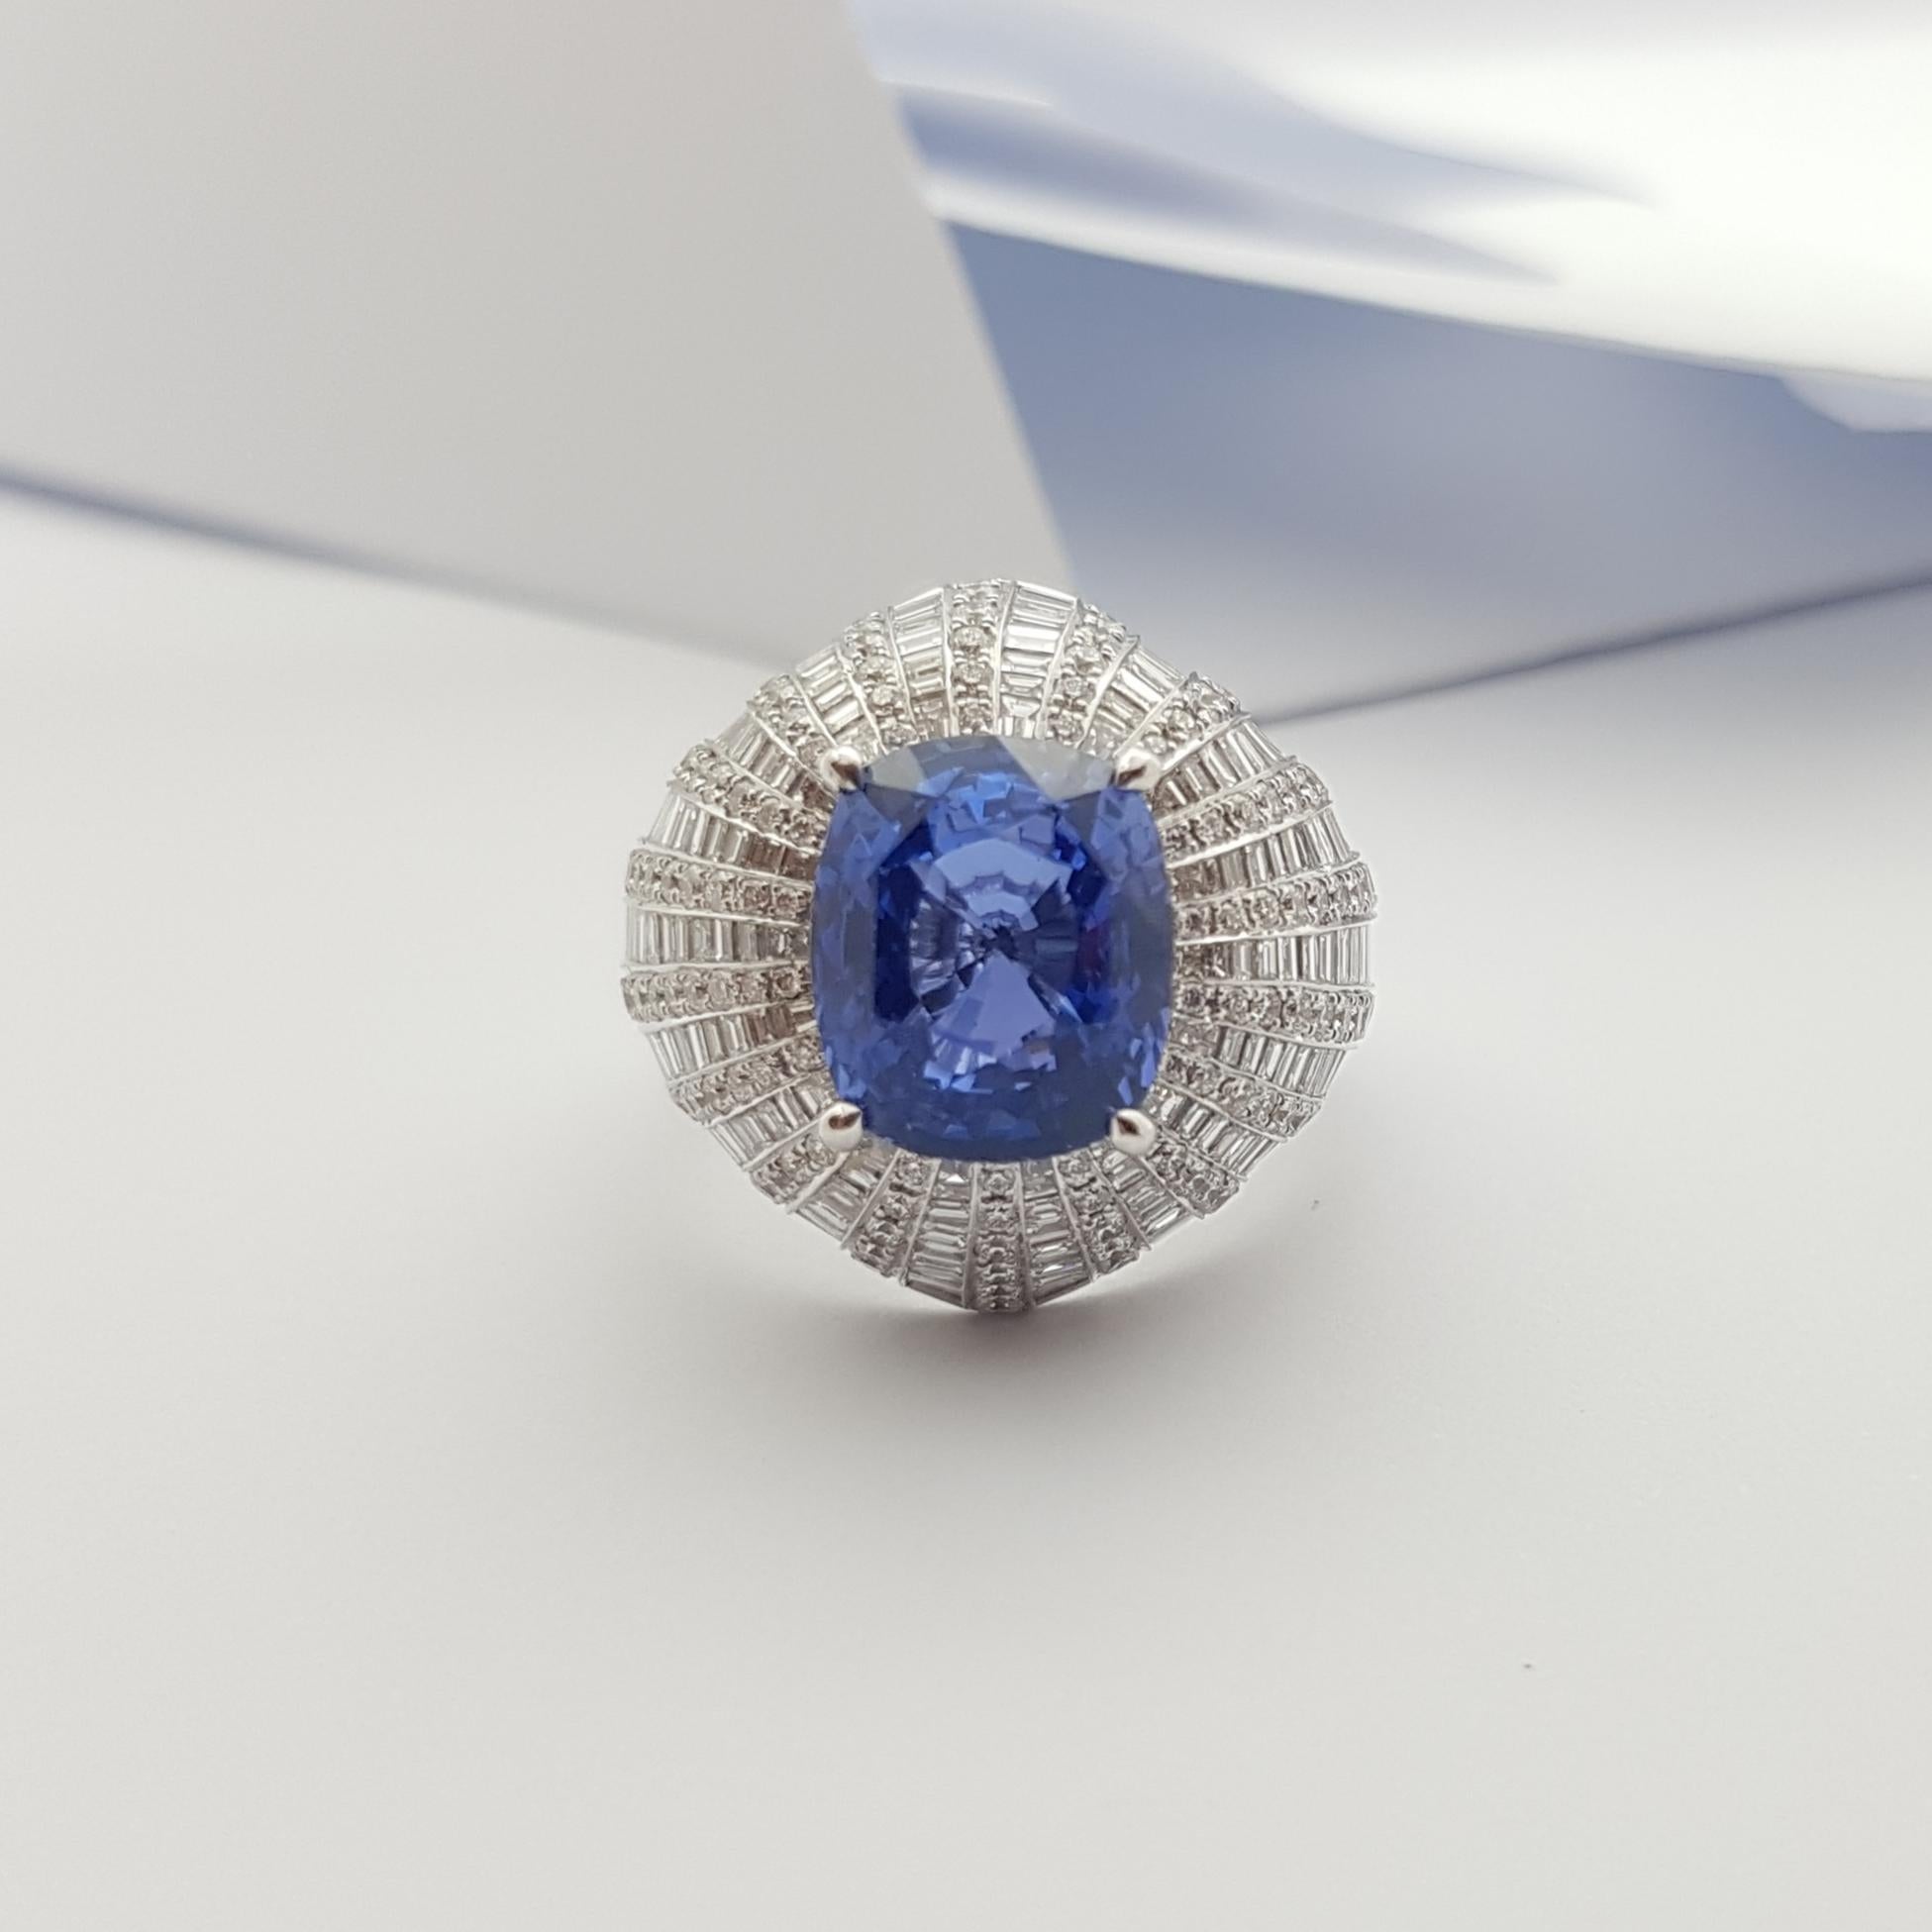 GIA Certified 8cts Ceylon Blue Sapphire with Diamond Ring Set in 18K White Gold For Sale 9